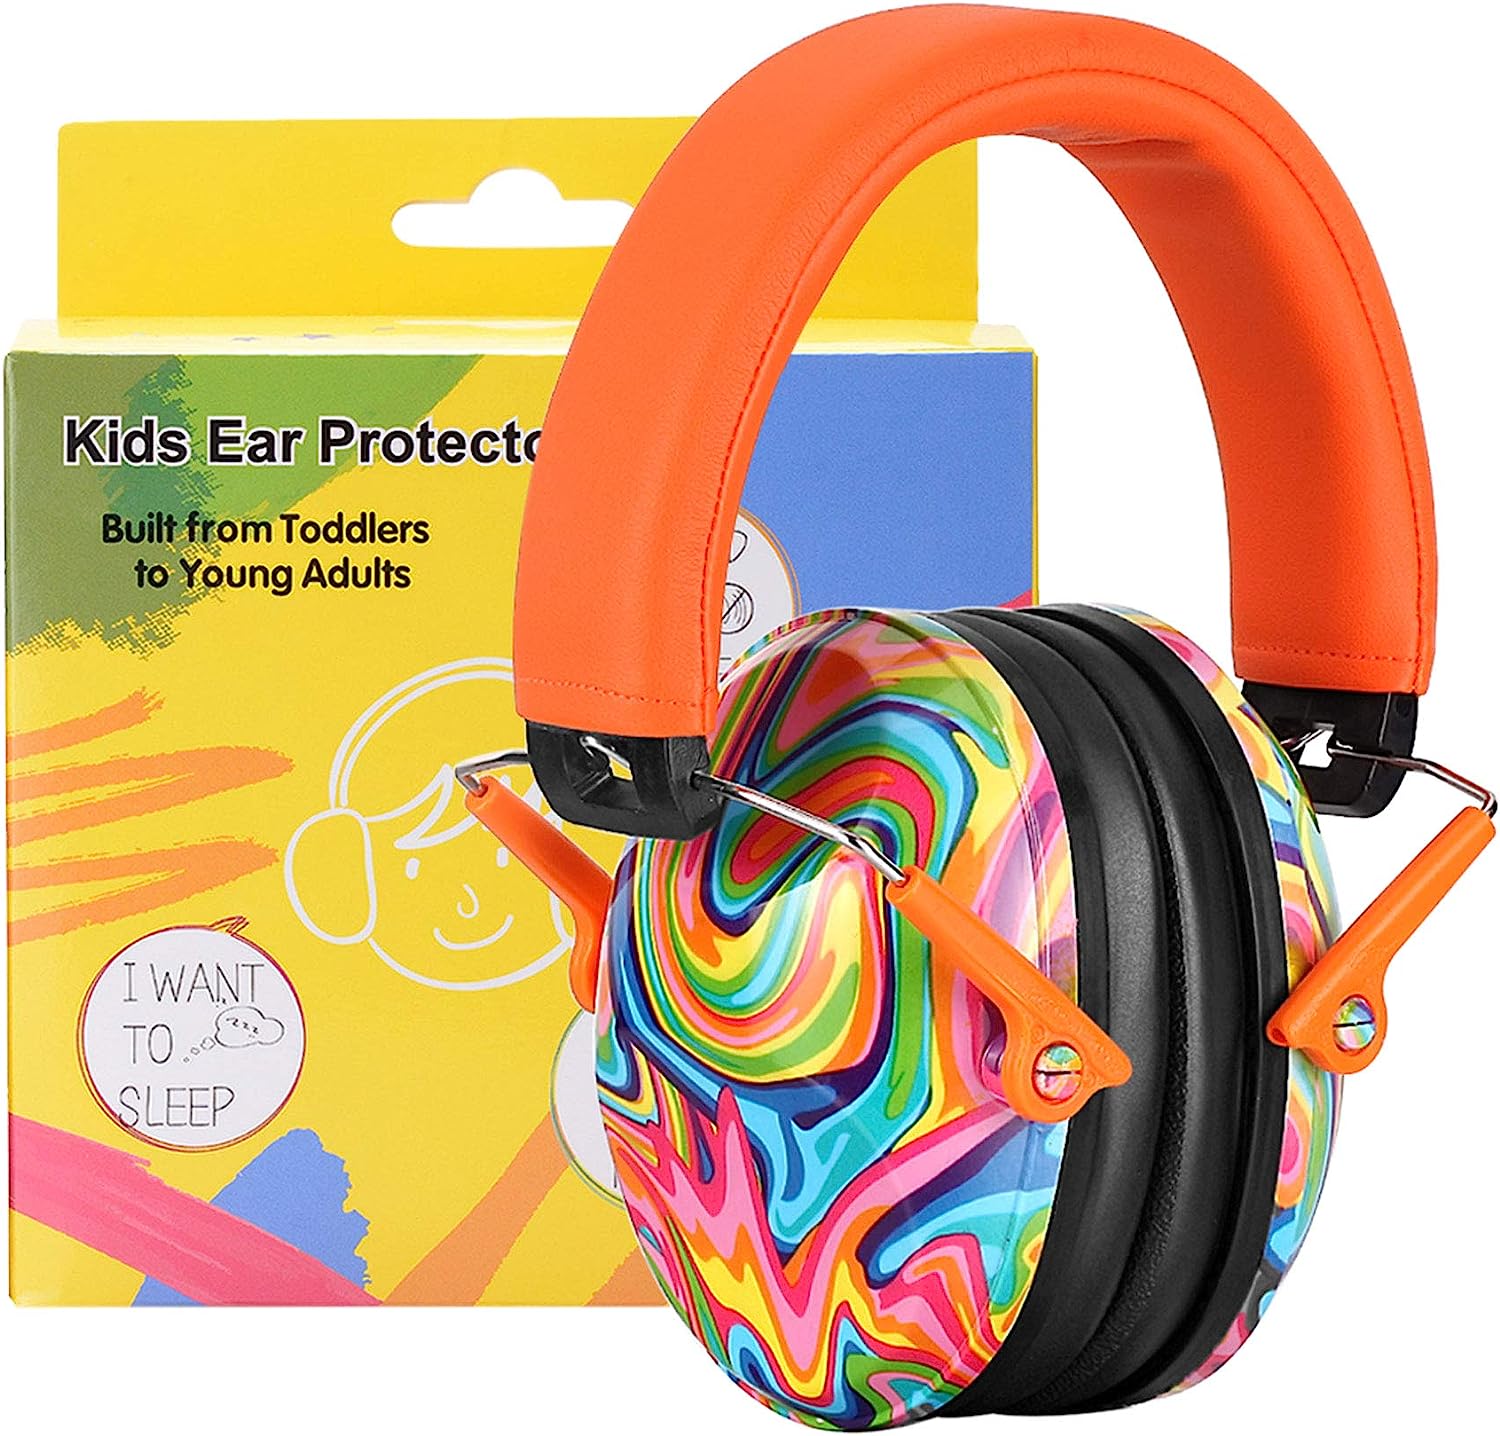 A Gift Guide of Sensory Toys for Autism - The Kisha Project